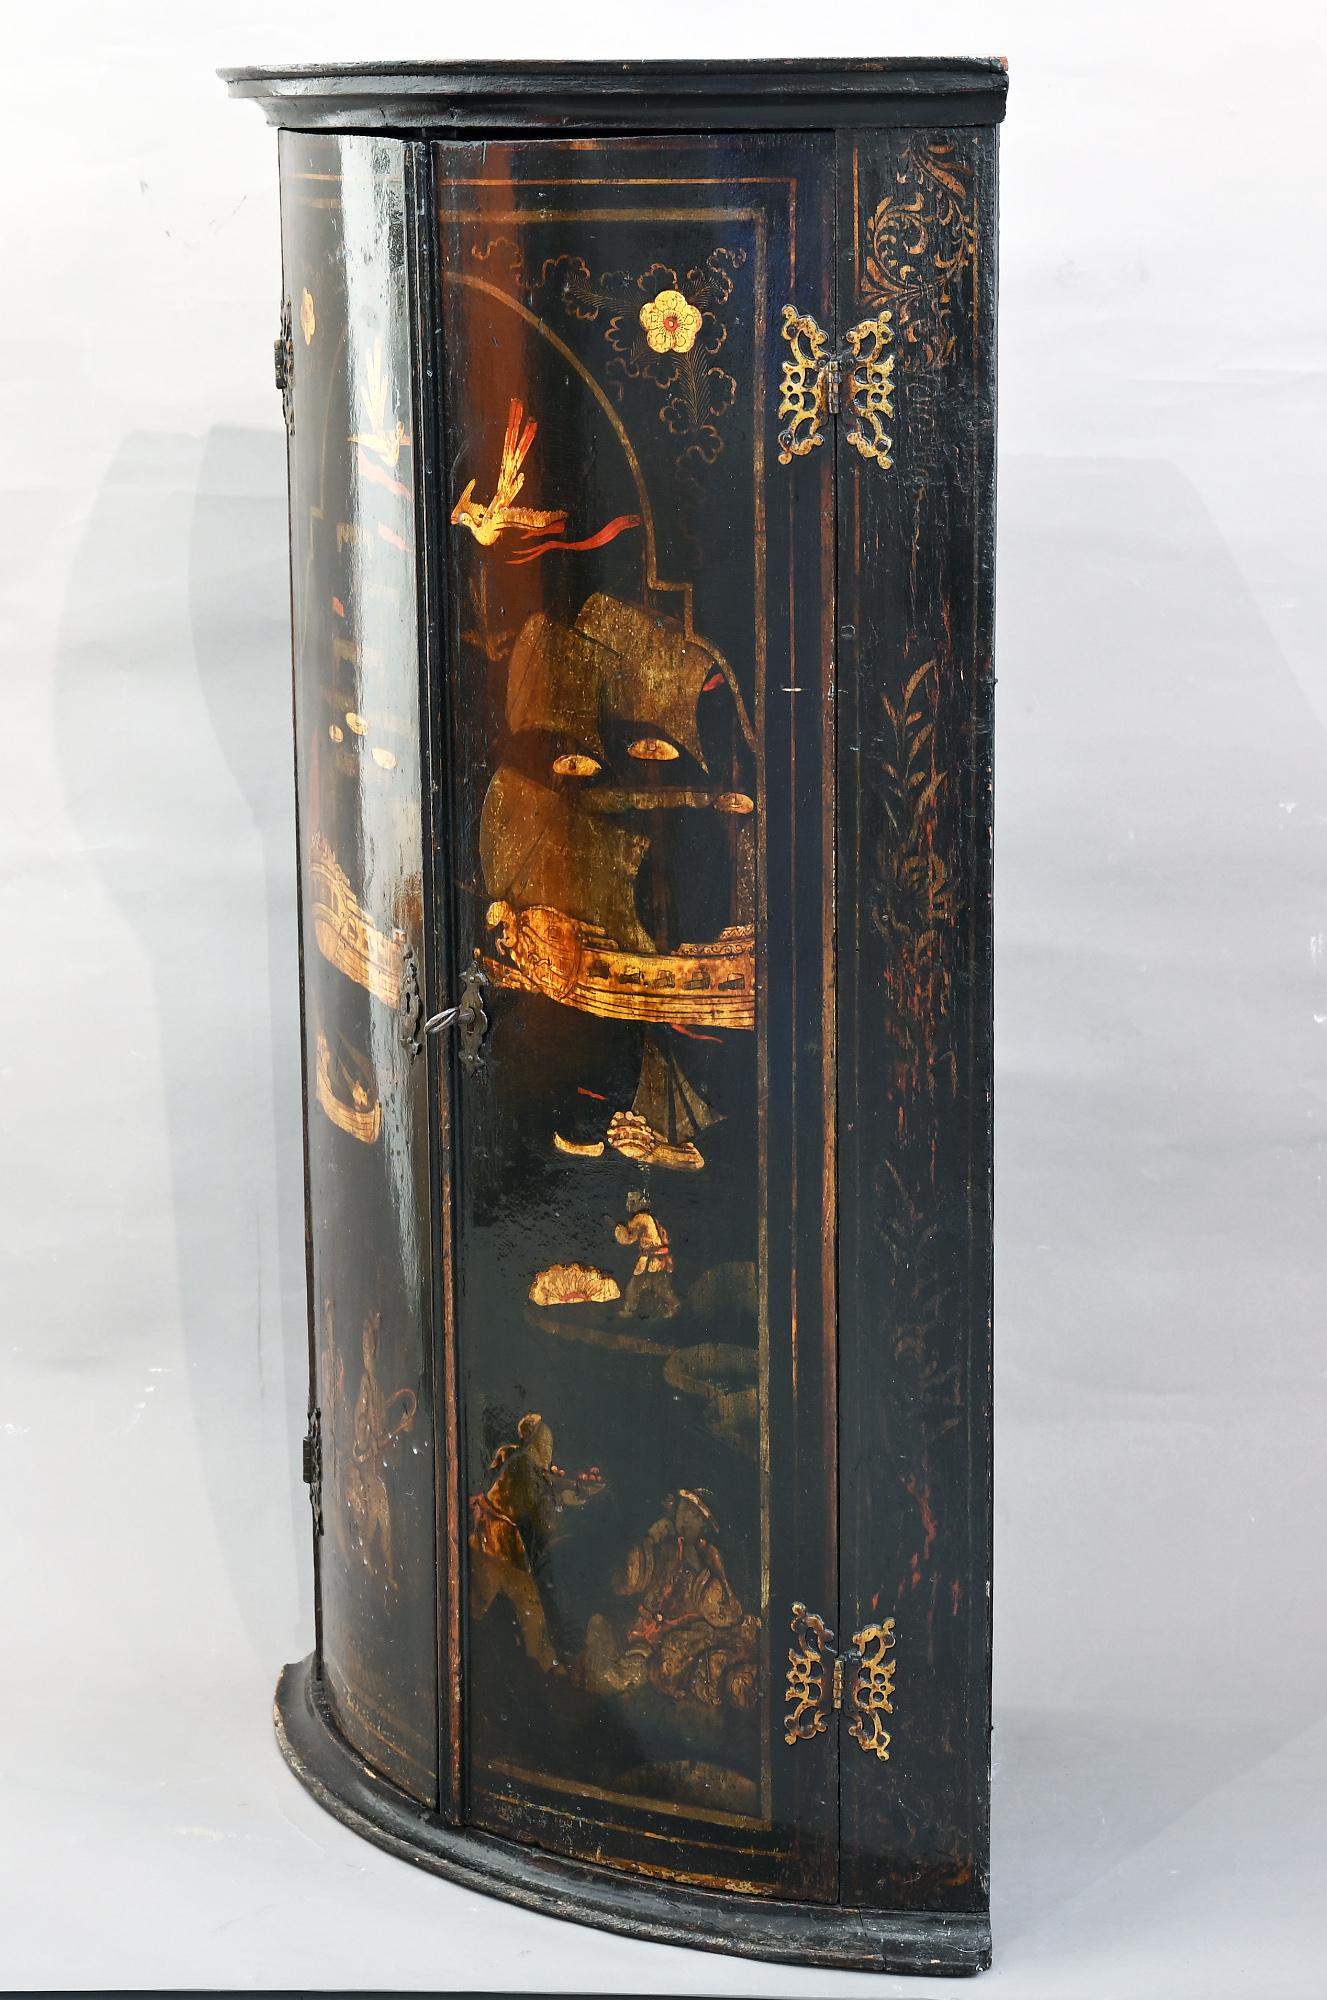 A late 18th century chinoiserie corner cupboard, England circa 1780-1790
The lacquered corner cupboard is very decorative, the interior fitted with three shelves,
and the pierced brass butterfly hinges are very decorative and nice.